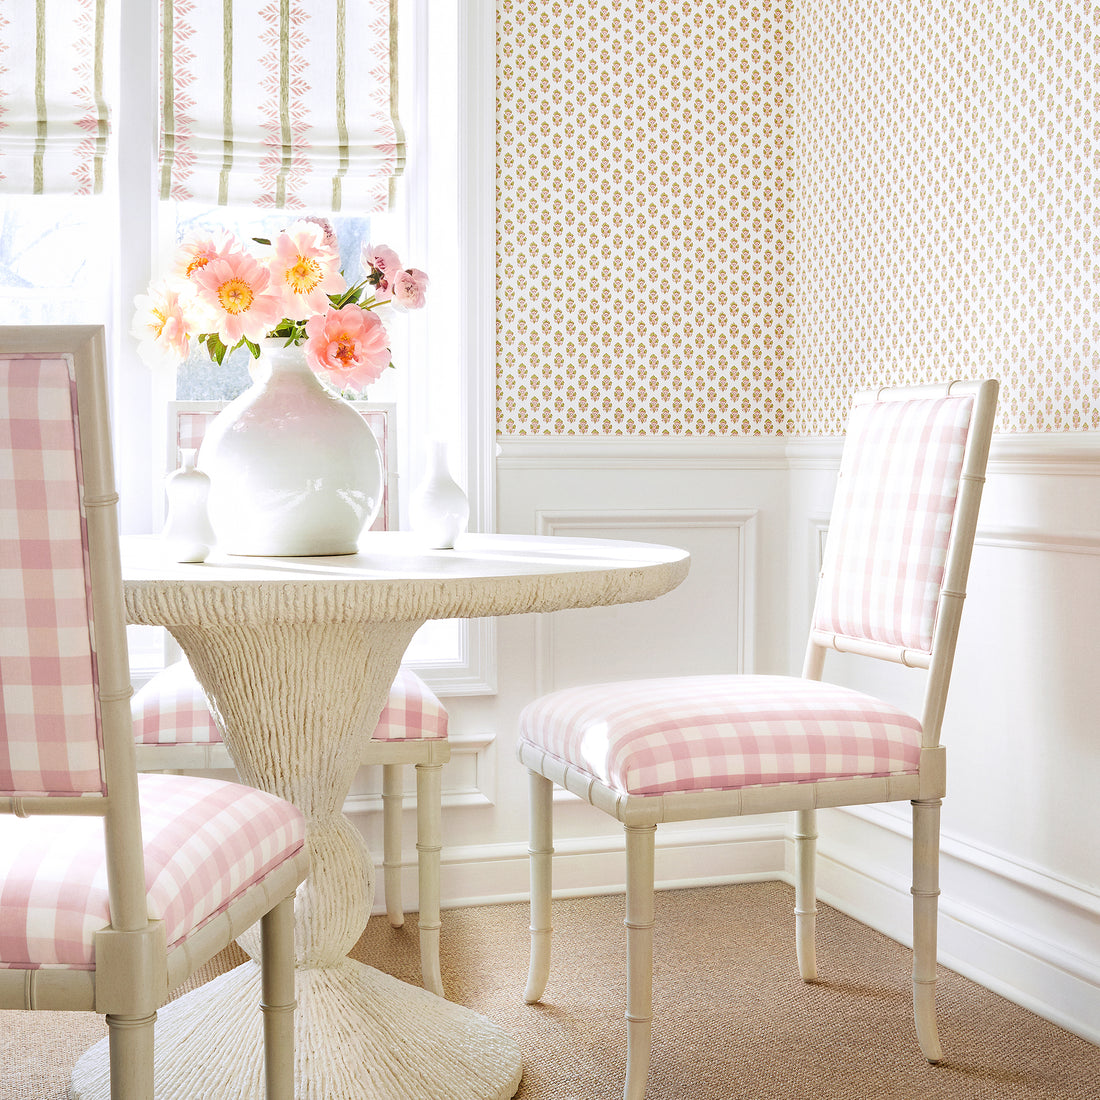 Darien Dining Chairs in Saybrook Check woven fabric in Blush - pattern number AW15148 - by Anna French in the Antilles collection